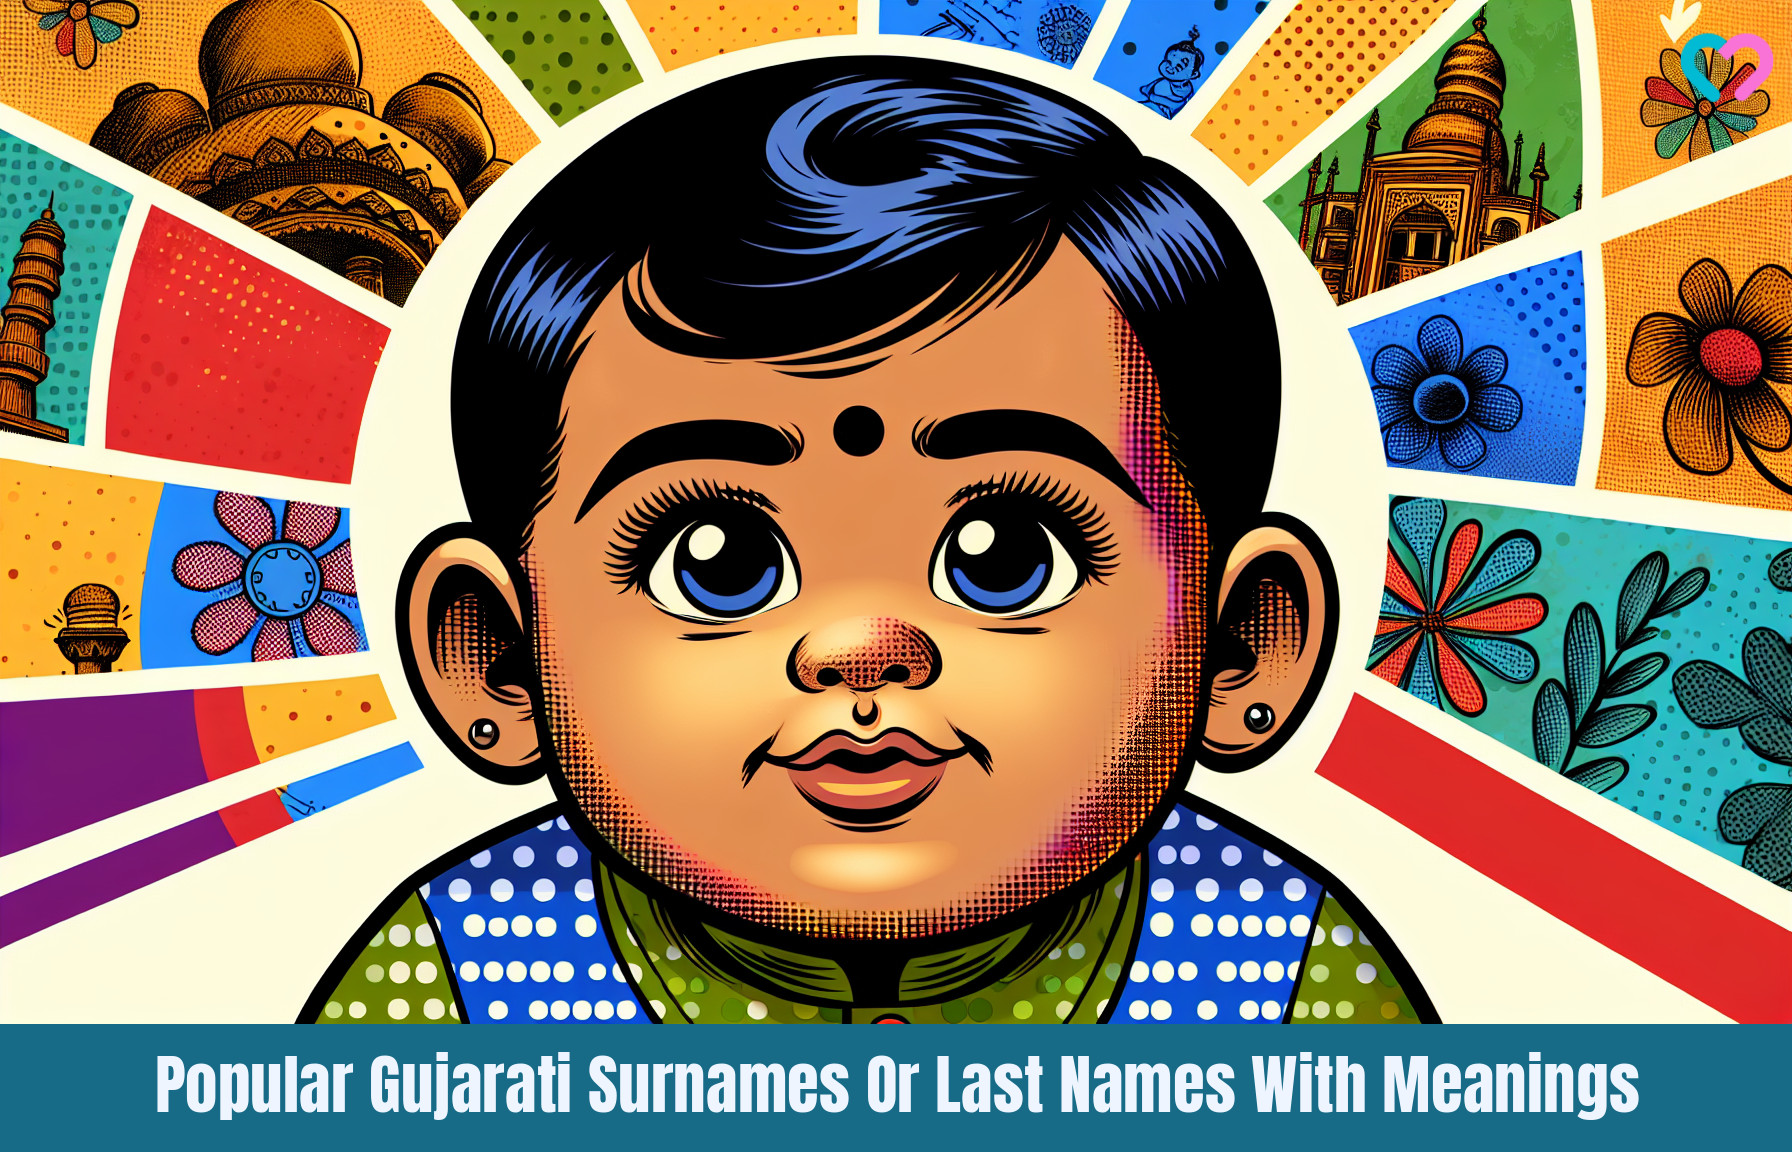 Popular Gujarati Surnames Or Last Names With Meanings_illustration